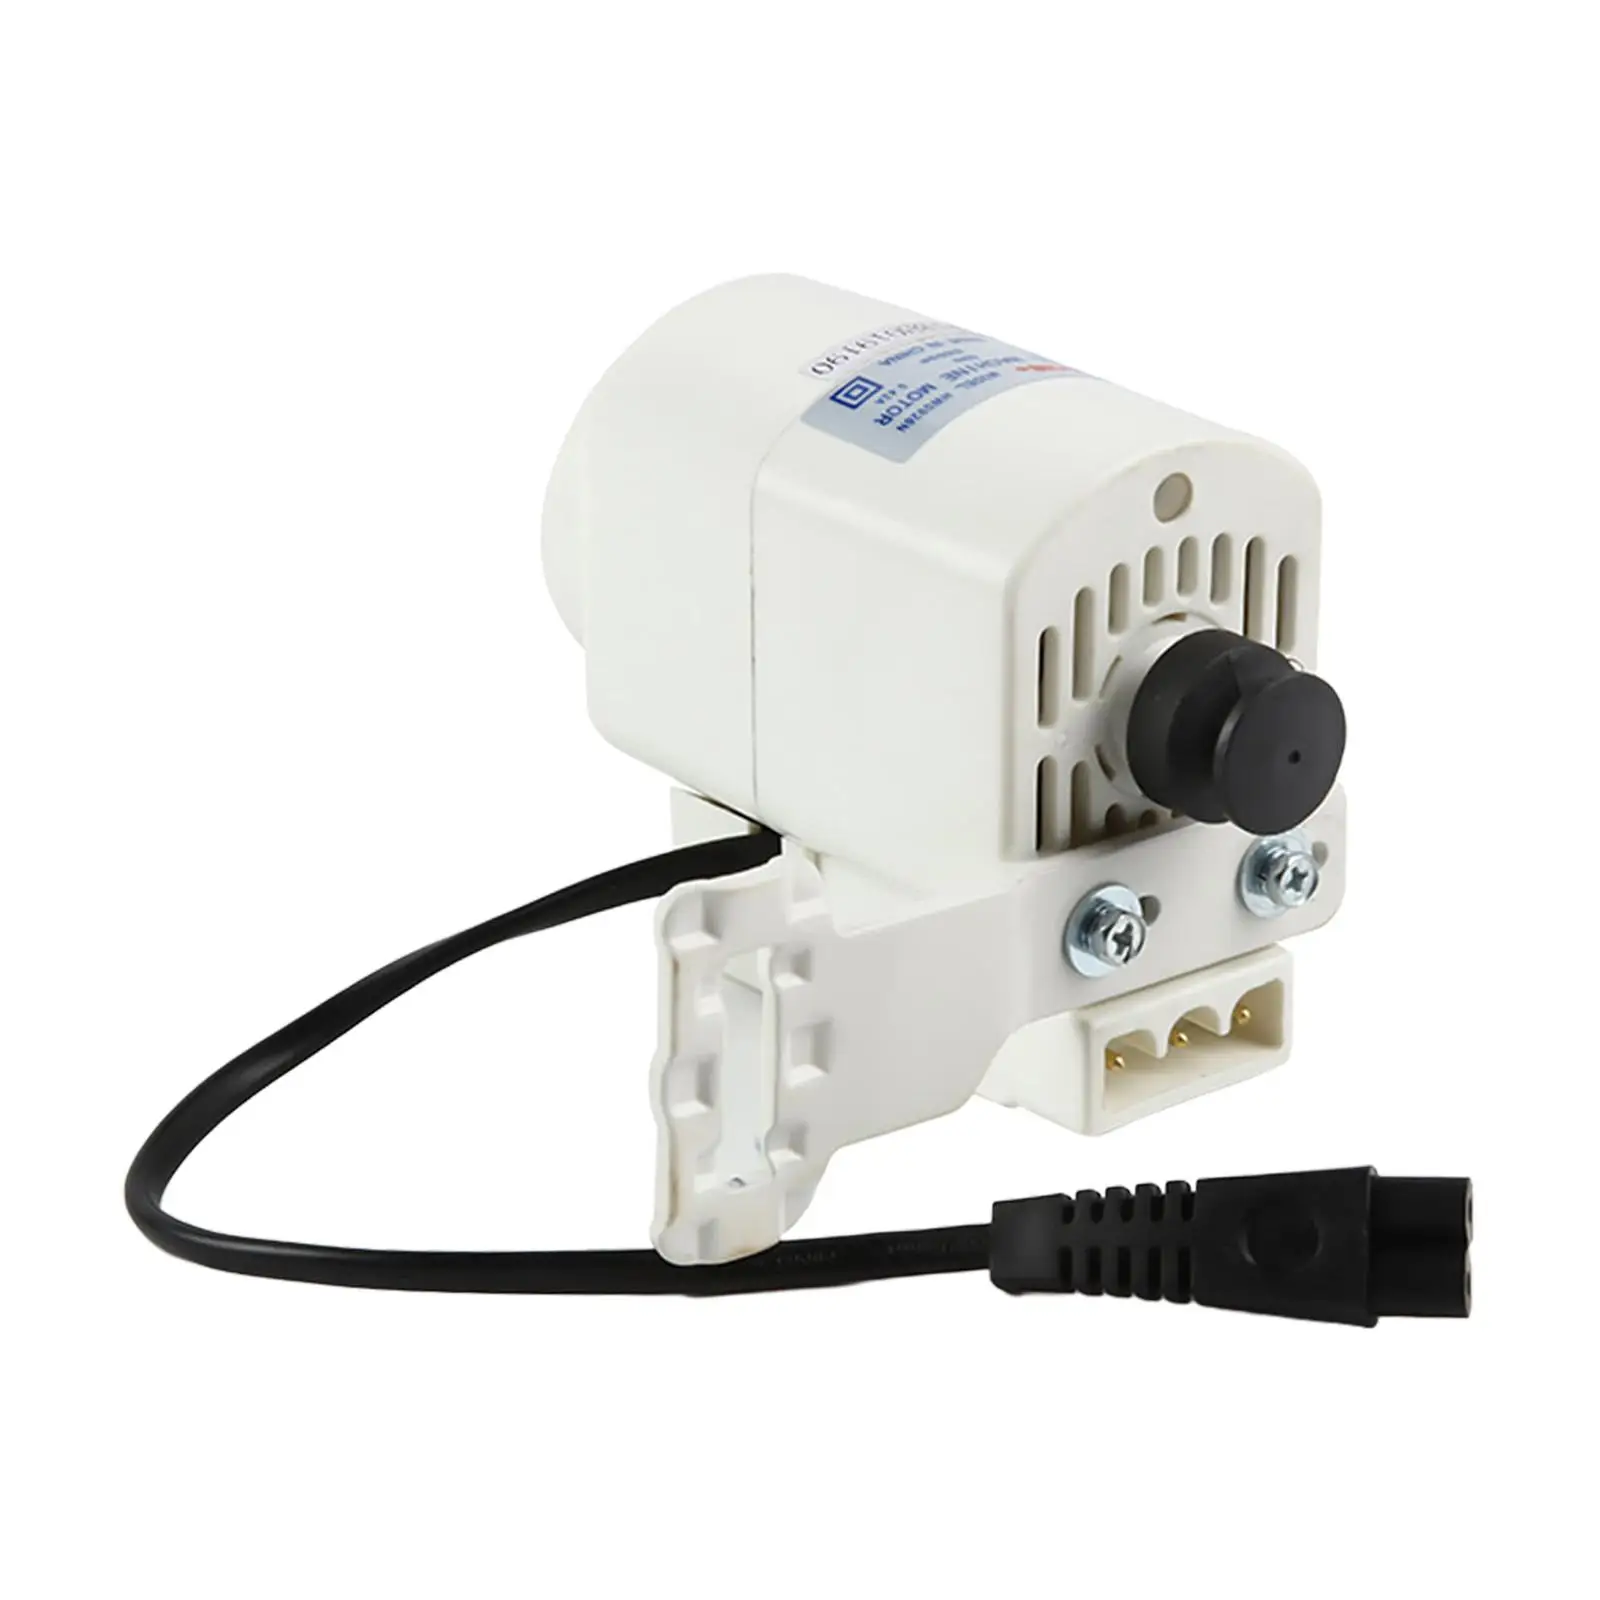 Sewing Machine Motor Portable 220-240V Durable Easy to Install Practical Lightweight Wear Resistant Replacement Household